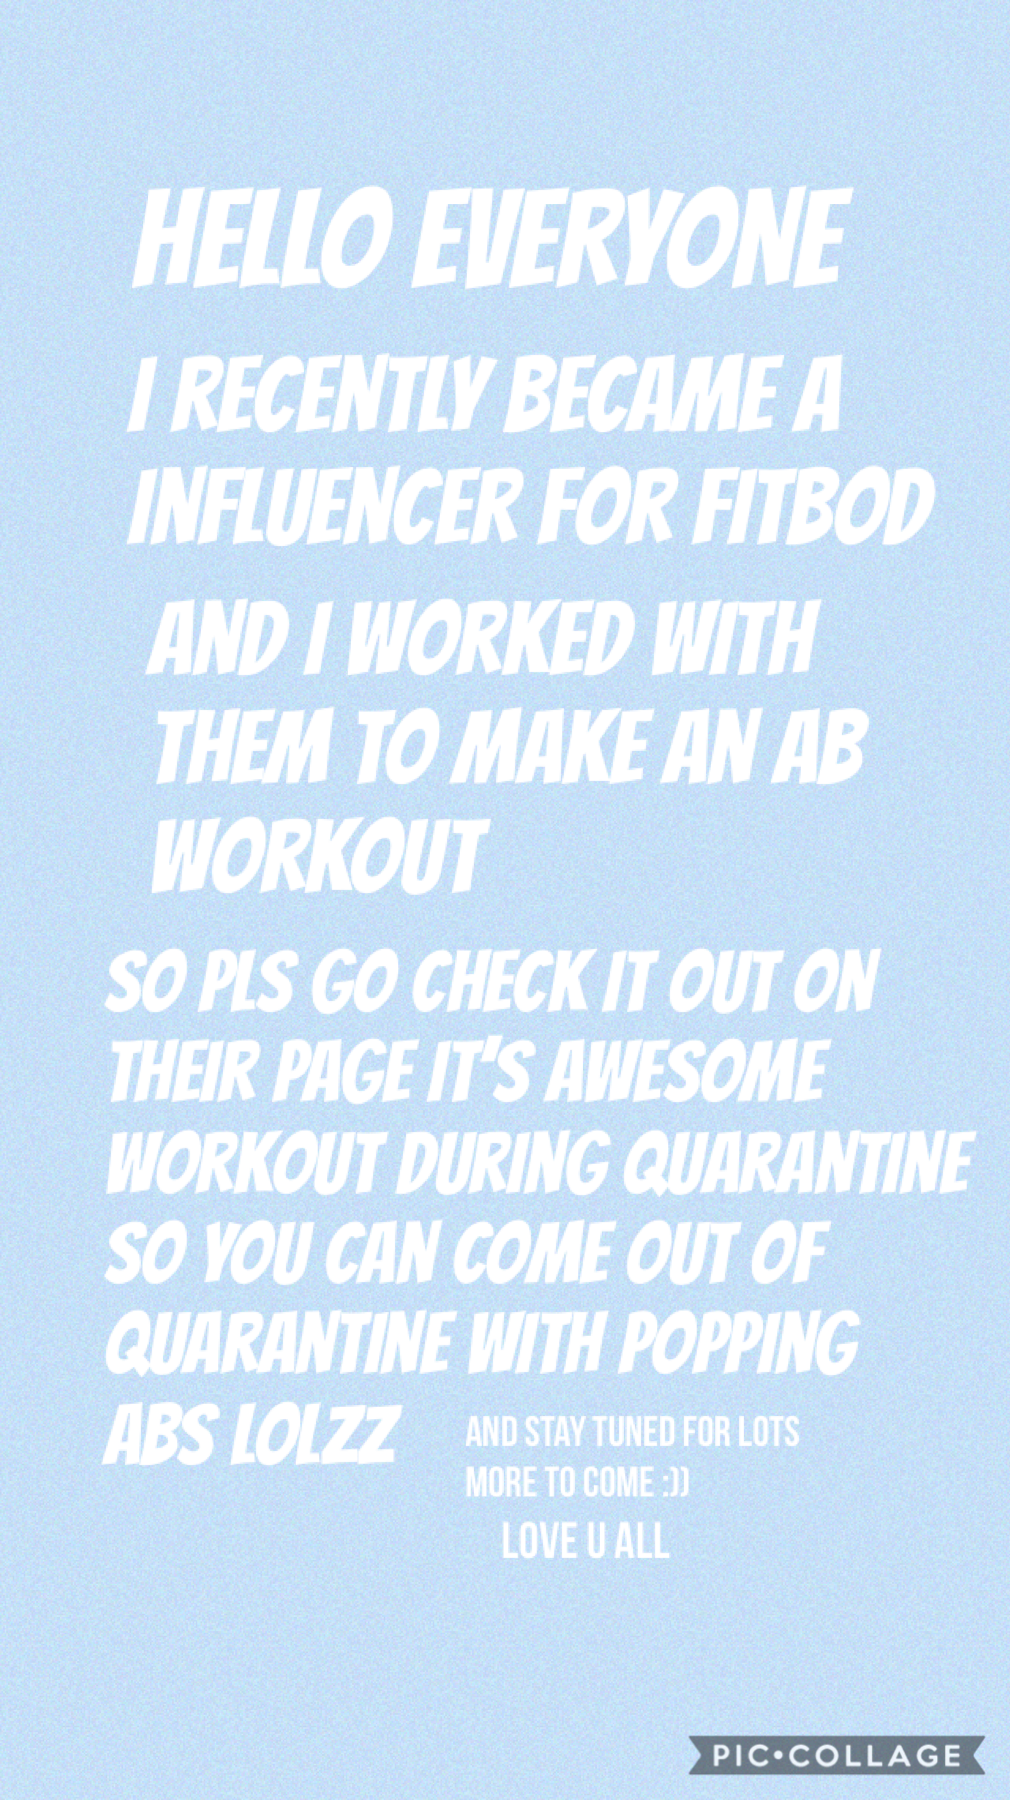 hi I’m so happy to be working with fitbod!!  Stay tuned and go check out my ab workout on their page (fitbod) 